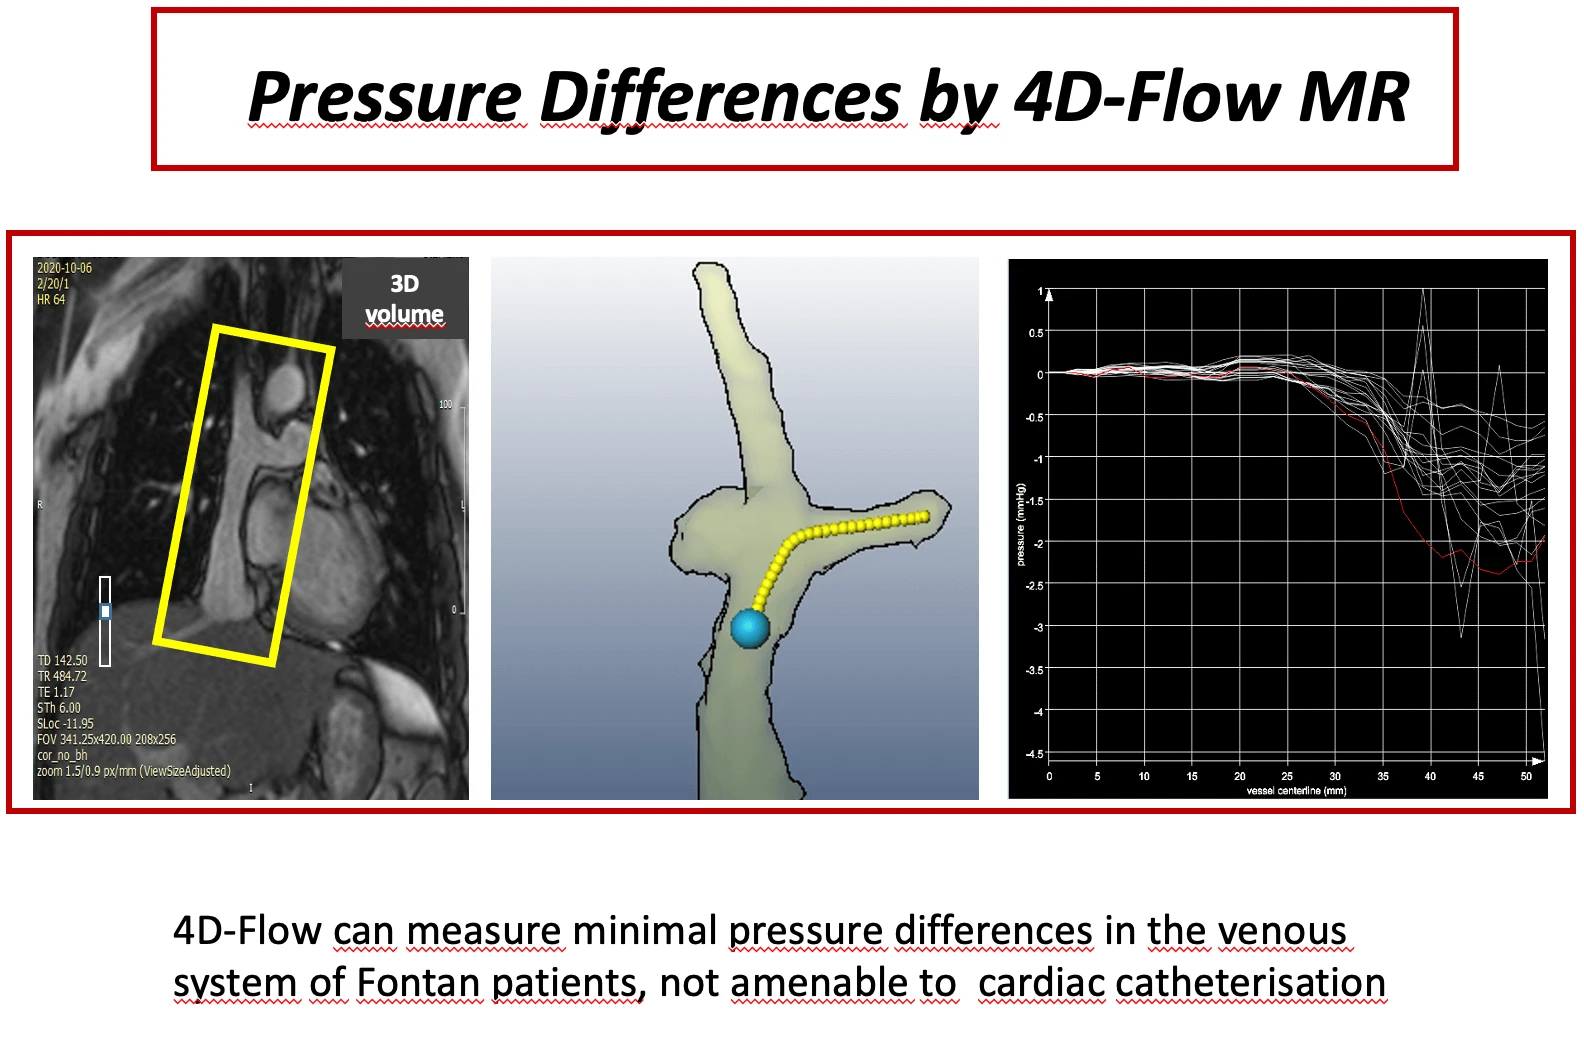 Minor Pressure Differences within the Fontan-Anastomosis in Patients with Total Cavopulmonary Connection by 4D-Flow Magnetic Resonance Imaging